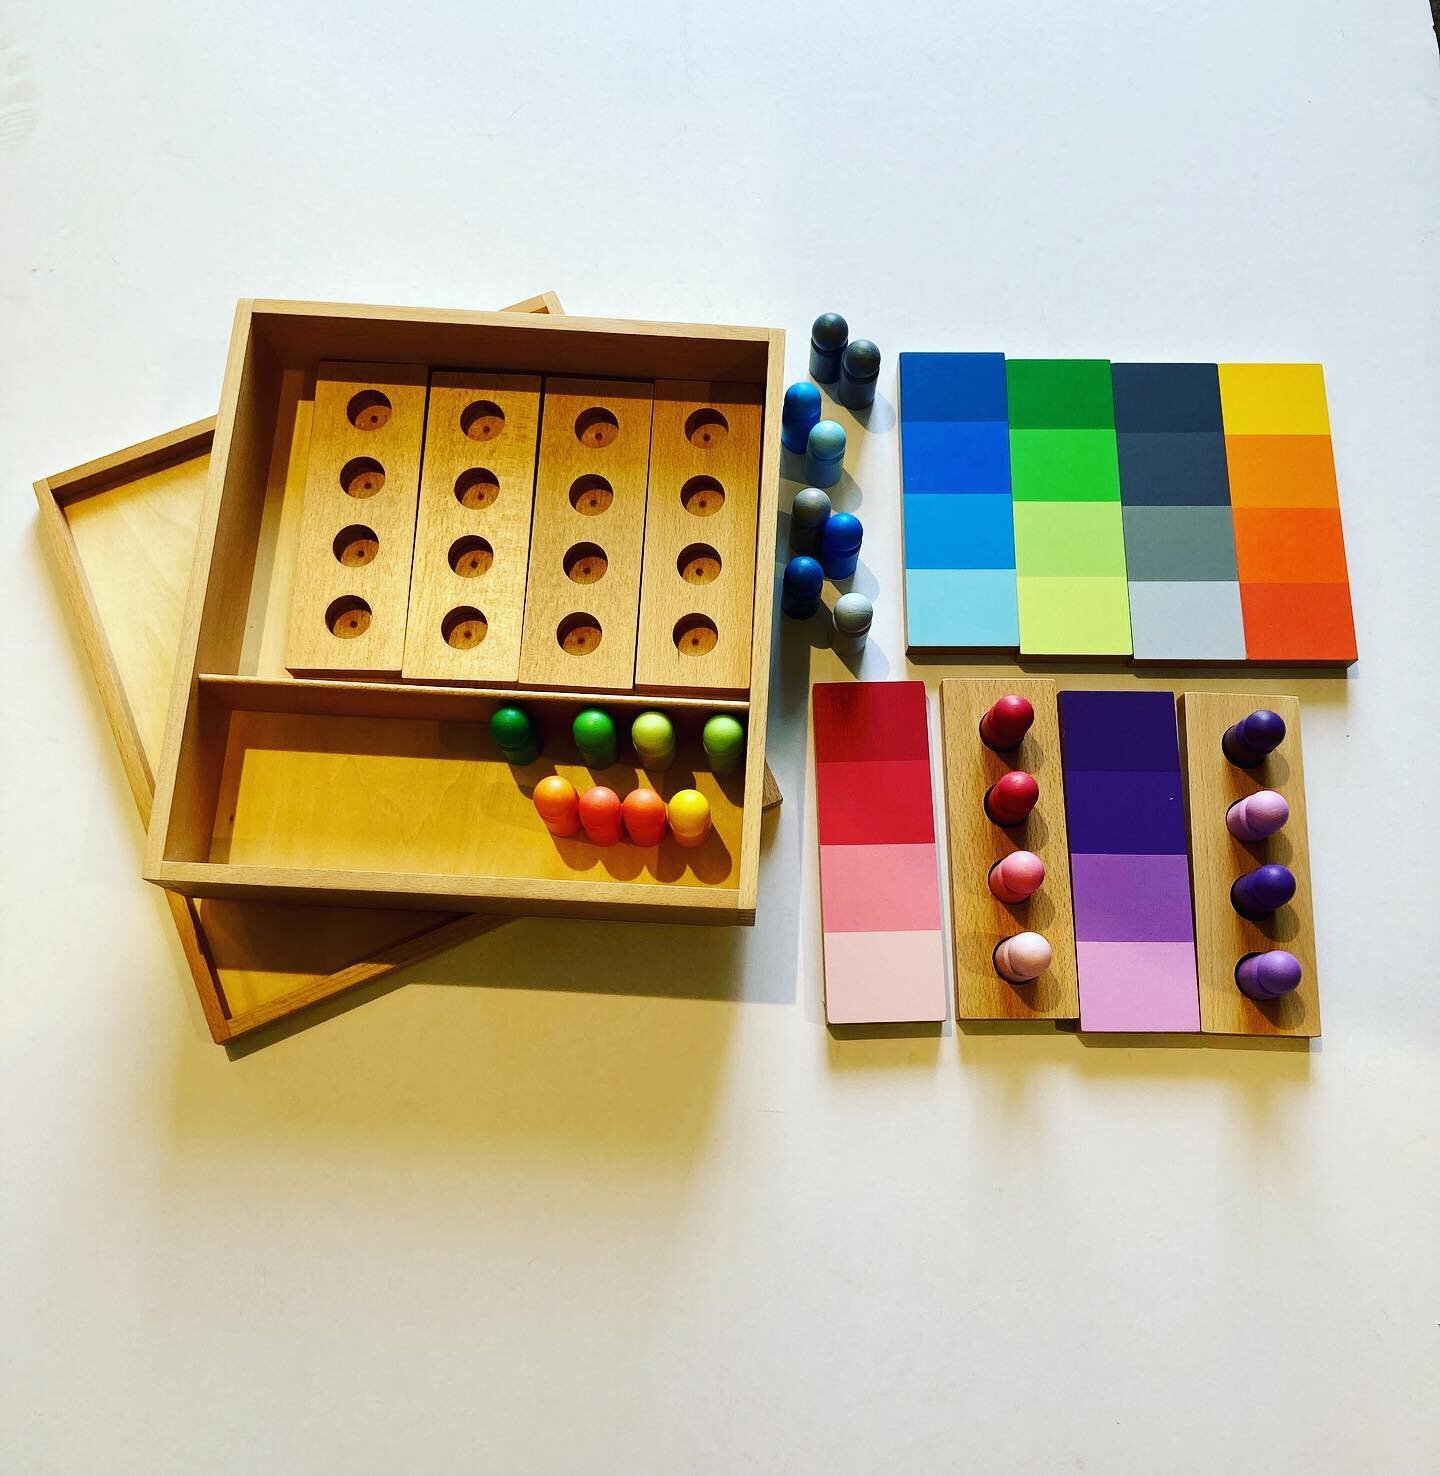 ❌SOLD❌Look at this color sorting Montessori game- what beautiful colors 100% wood! Pristine condition! What a great gift!  On consignment $45.00
#montessorilearning #woodtoys #silverlakekids #echoparkmontessori #losfelizmontessori #supportlocalbusine